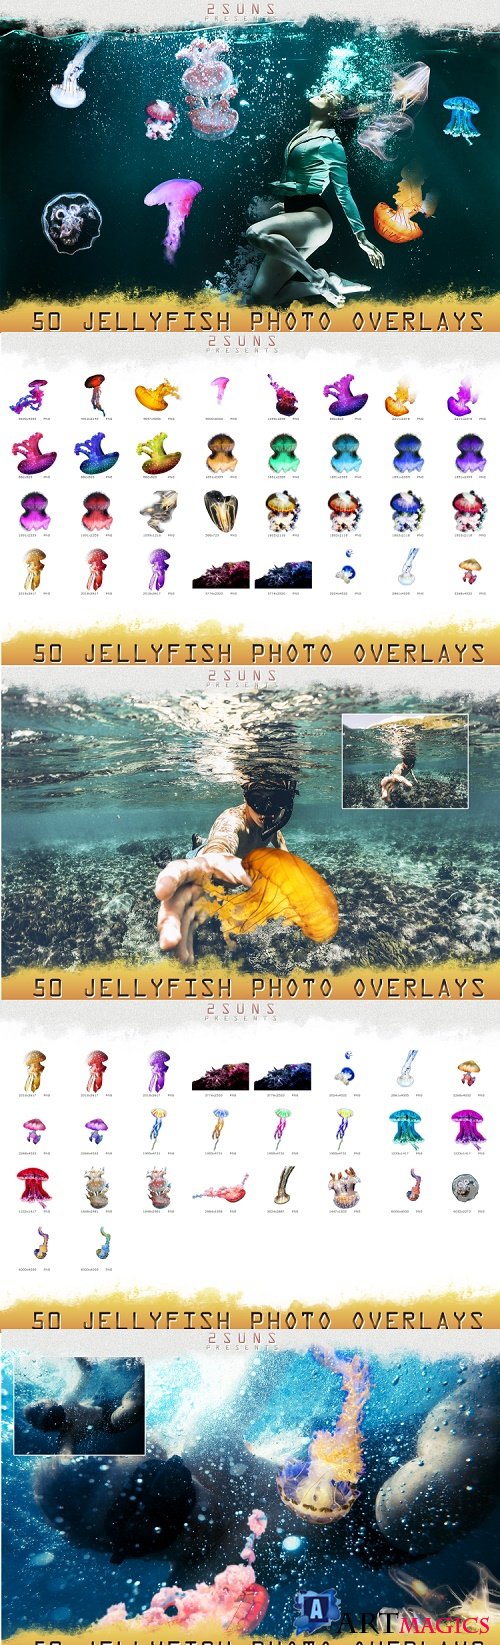 50 jellyfish overlays Clipart, PNG, transparent - 317804